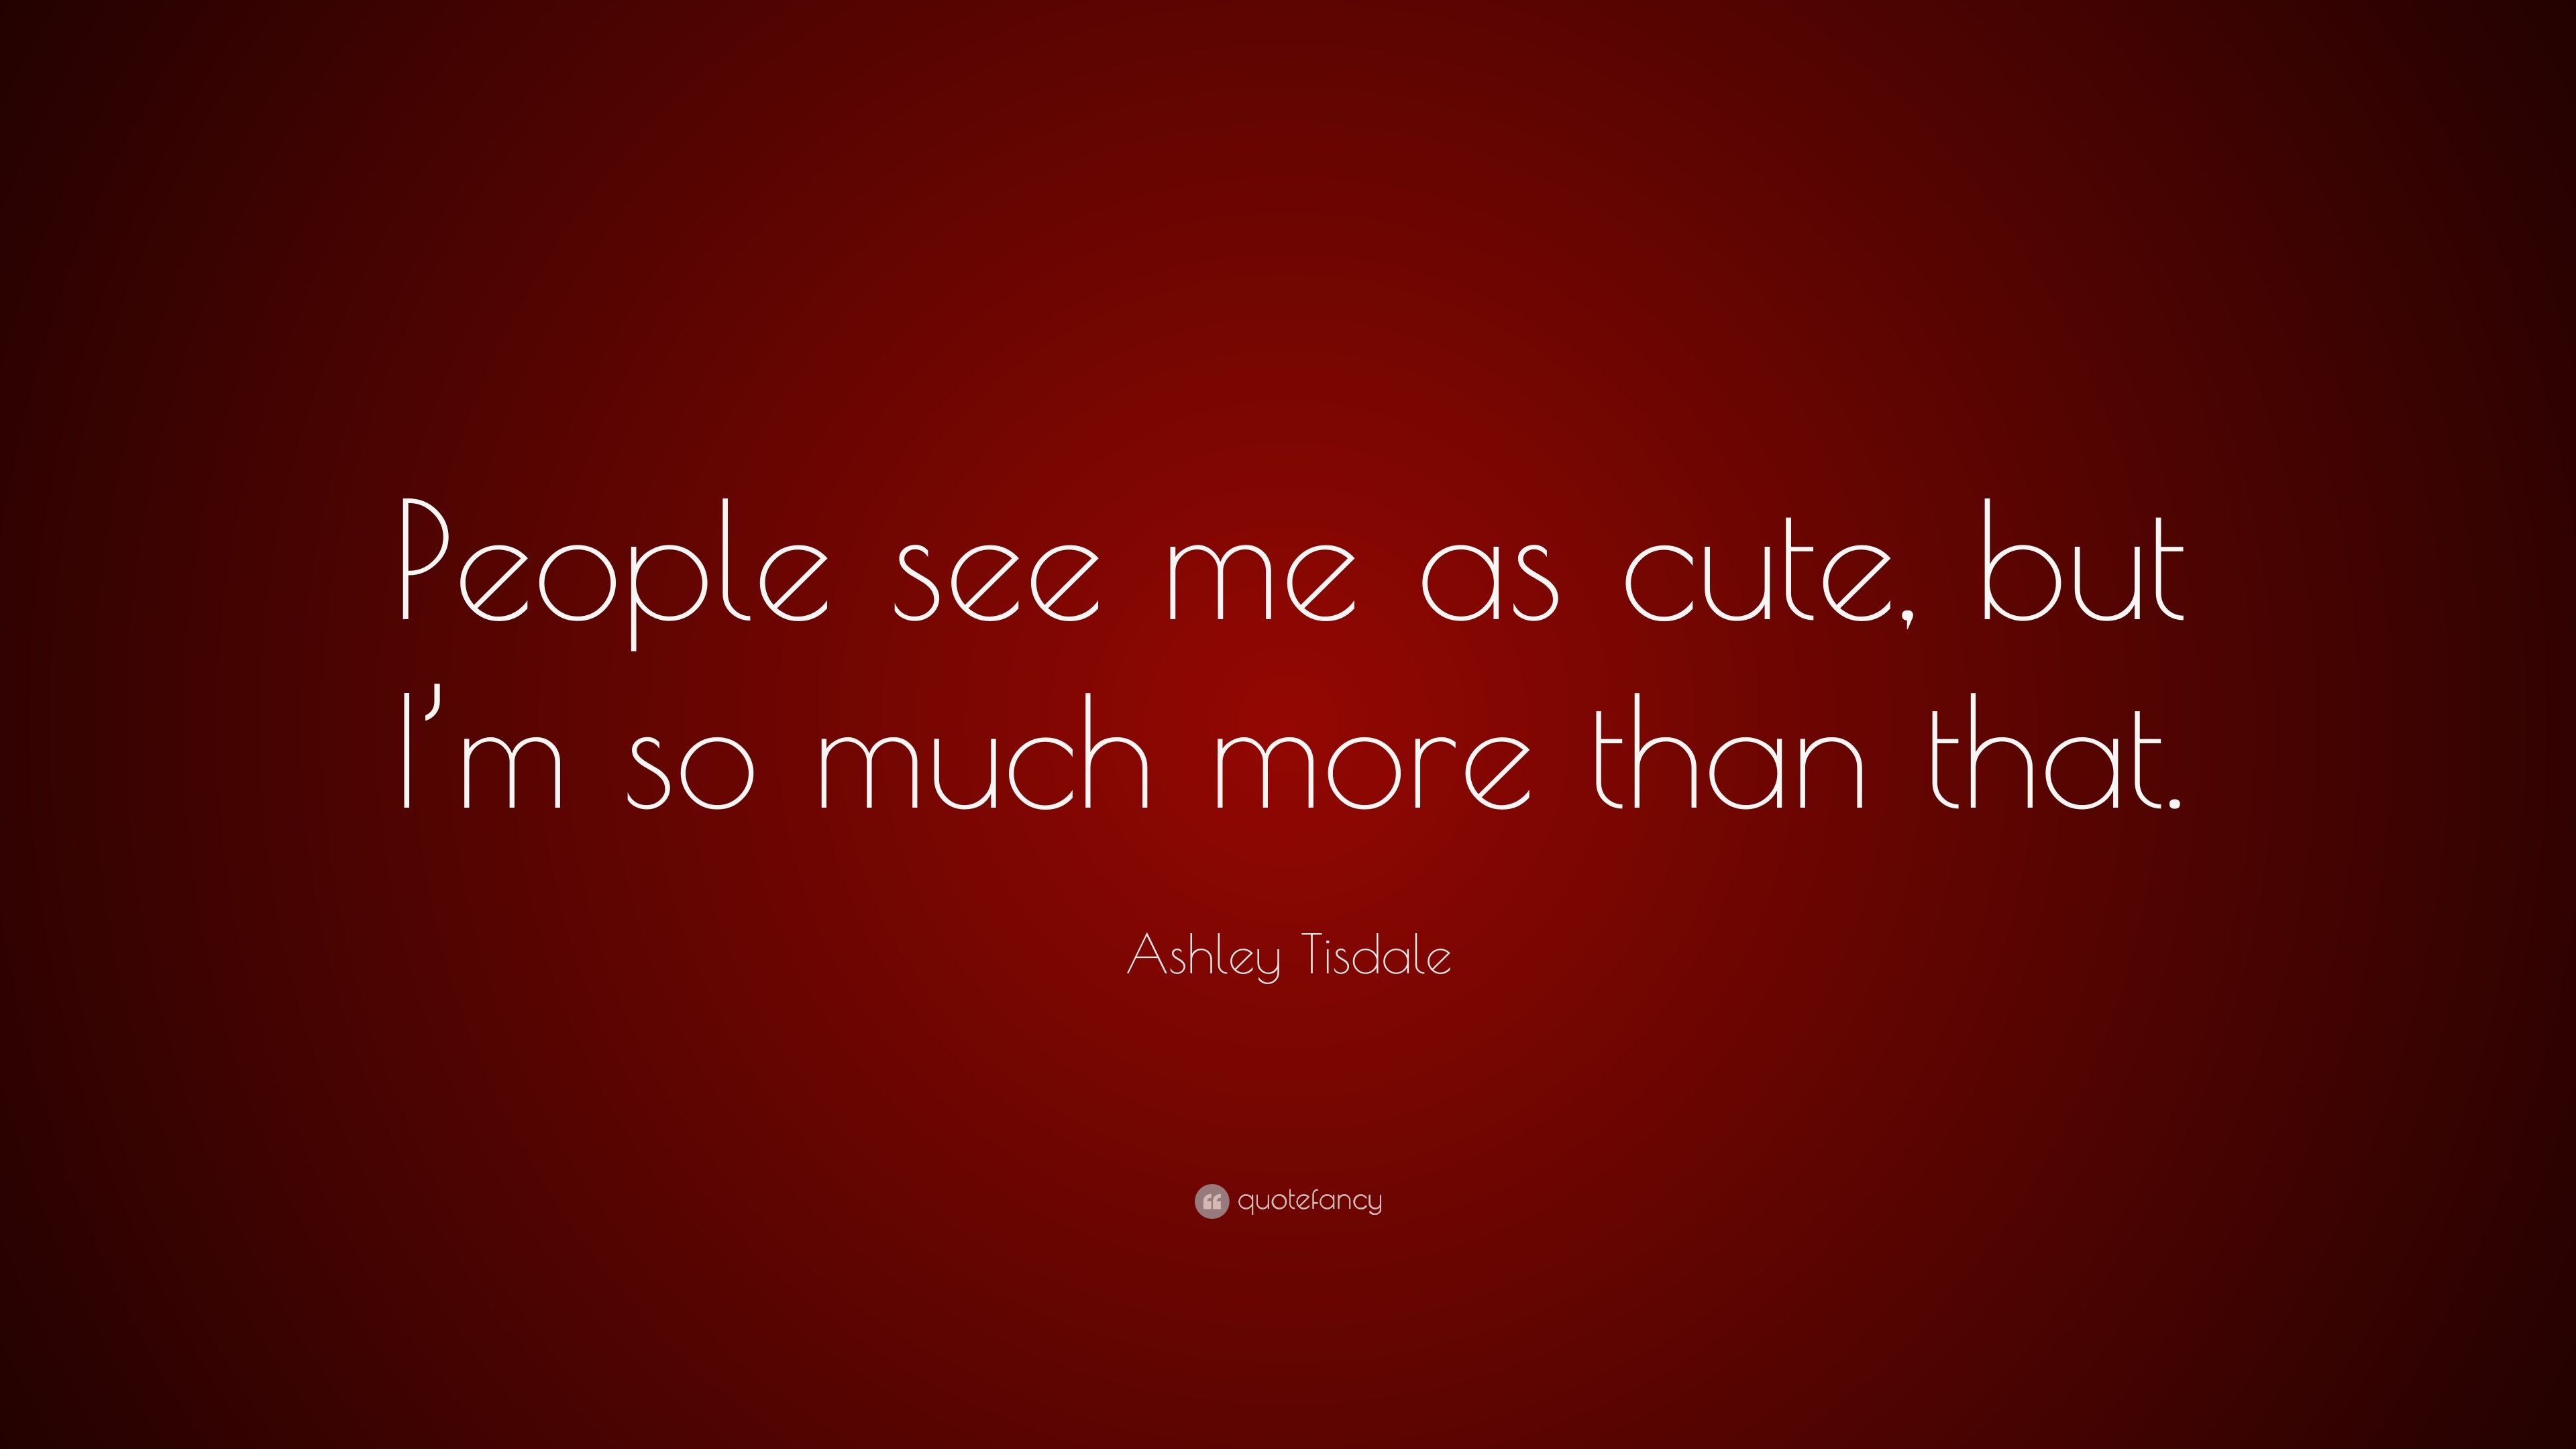 Ashley Tisdale Quote: “People see me as cute, but I'm so much more than that.” (7 wallpaper)